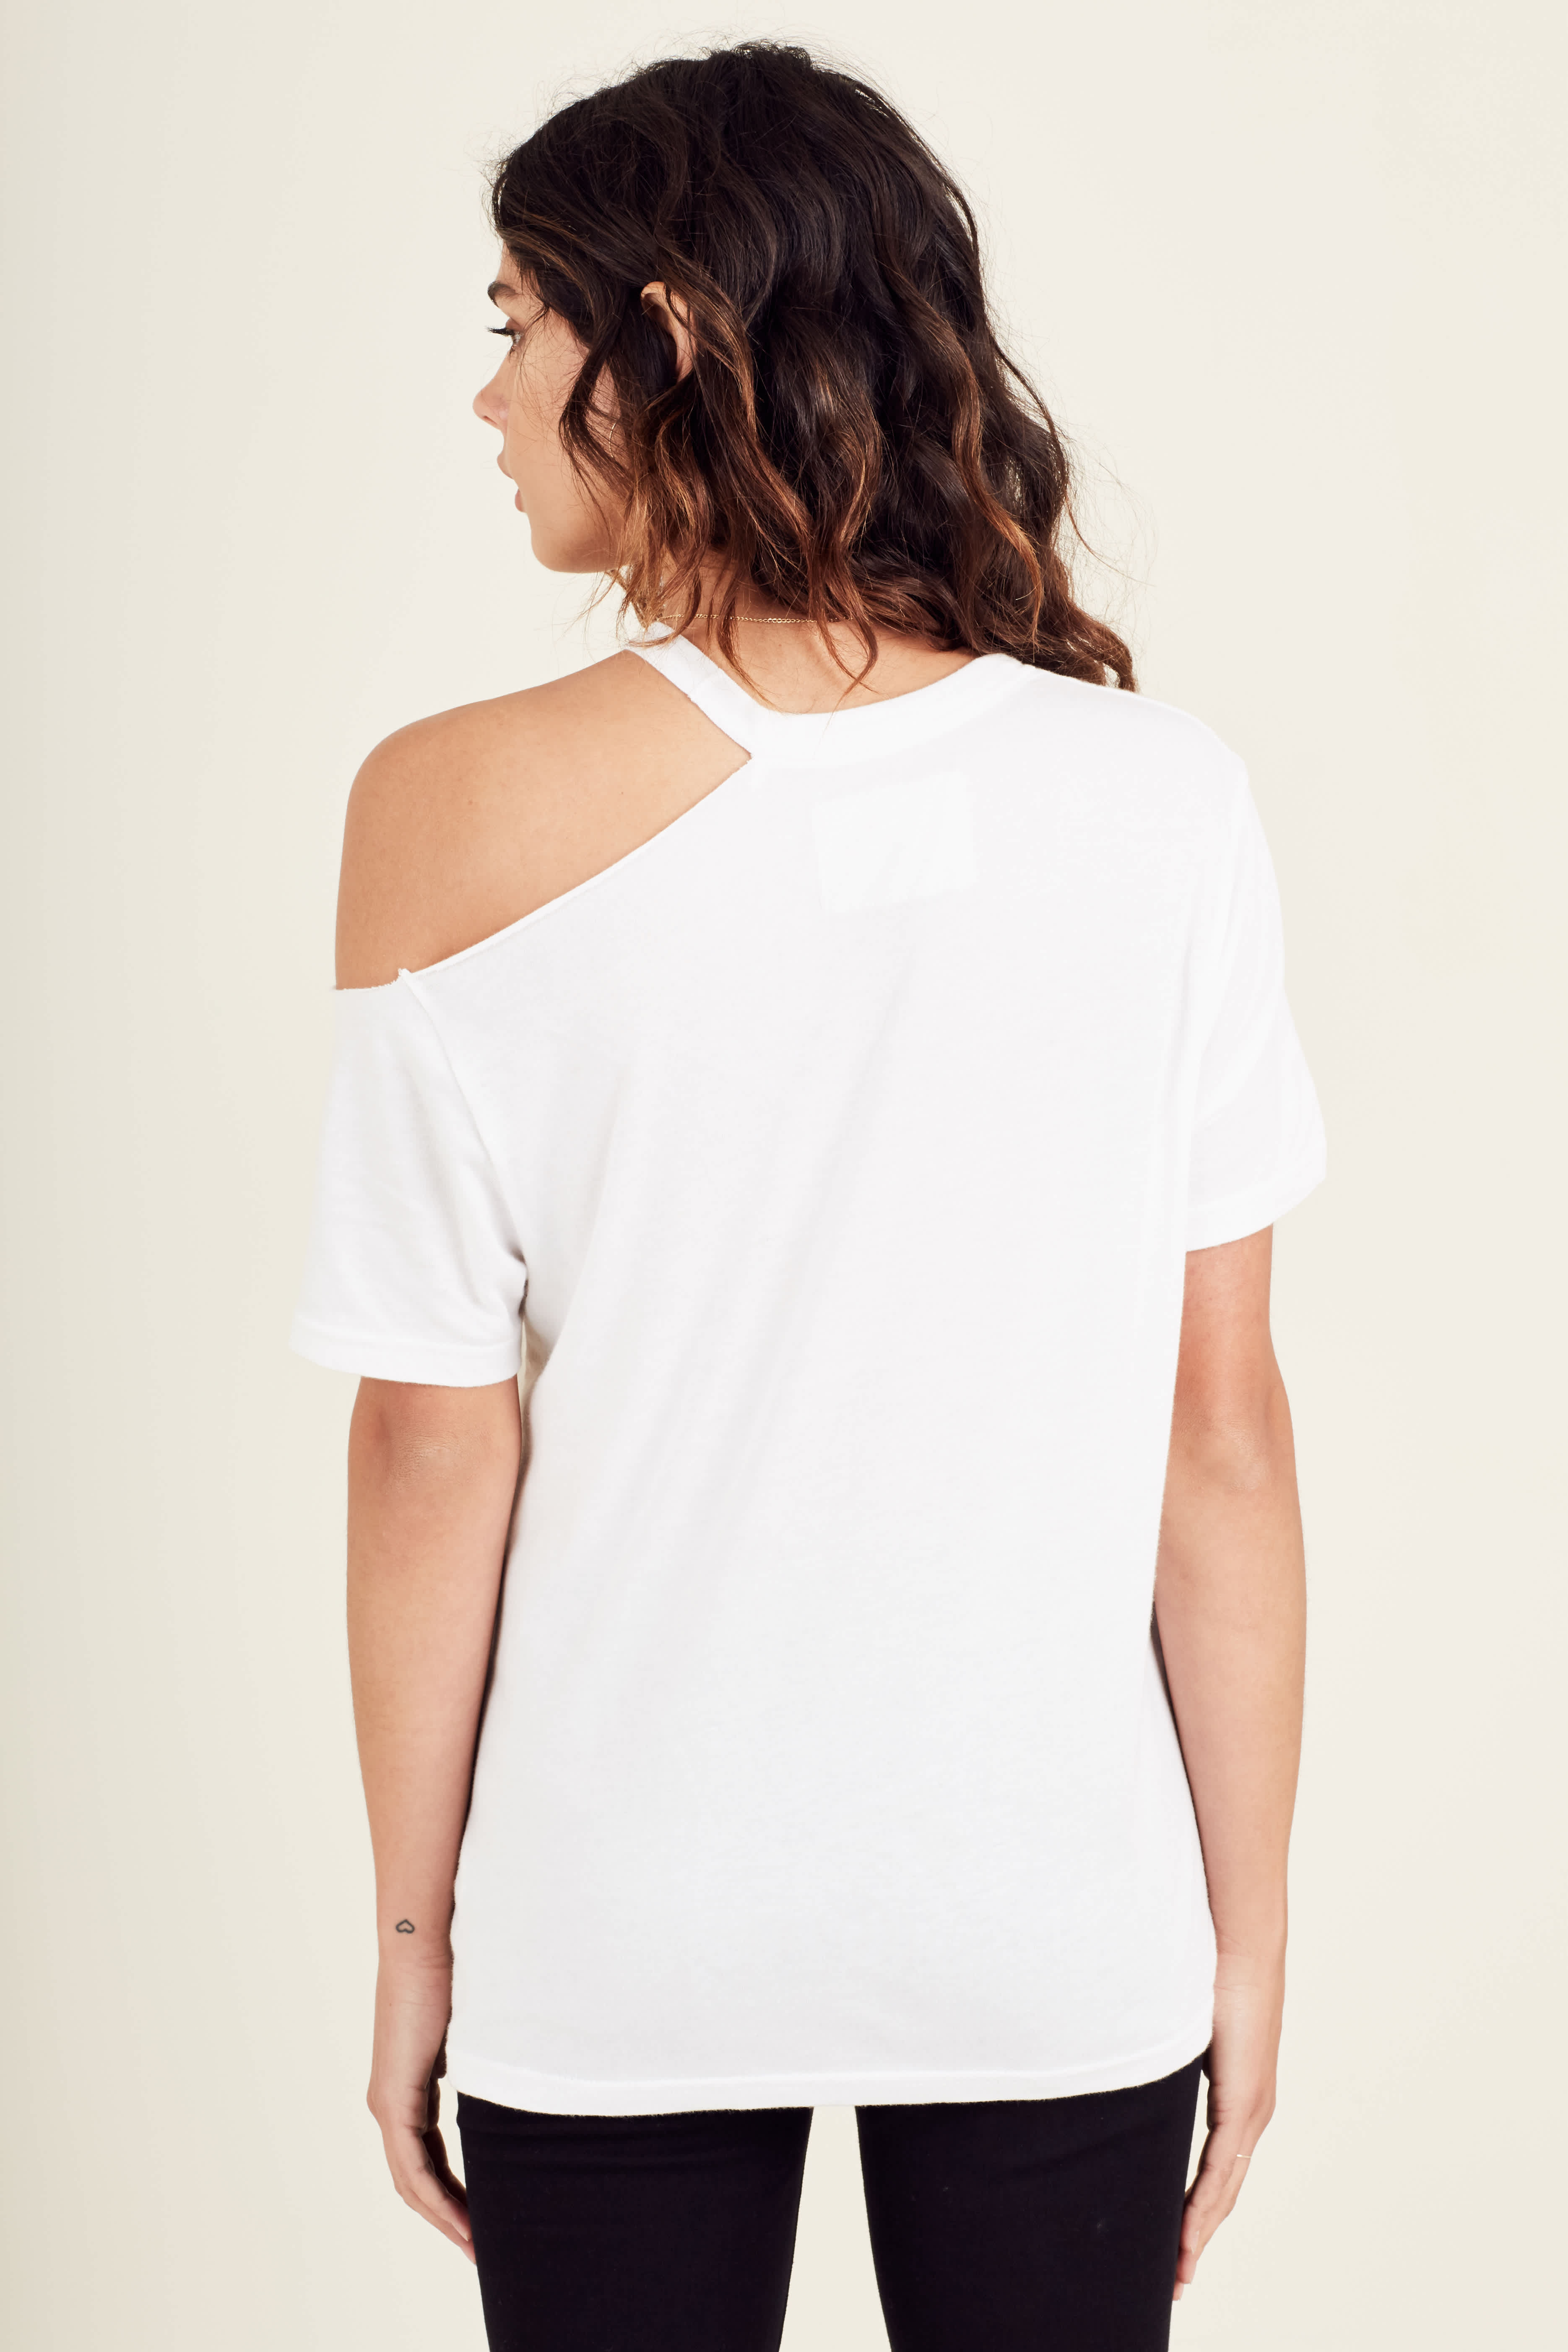 WOMENS ASYMMETRICAL COLD SHOULDER BAND TEE